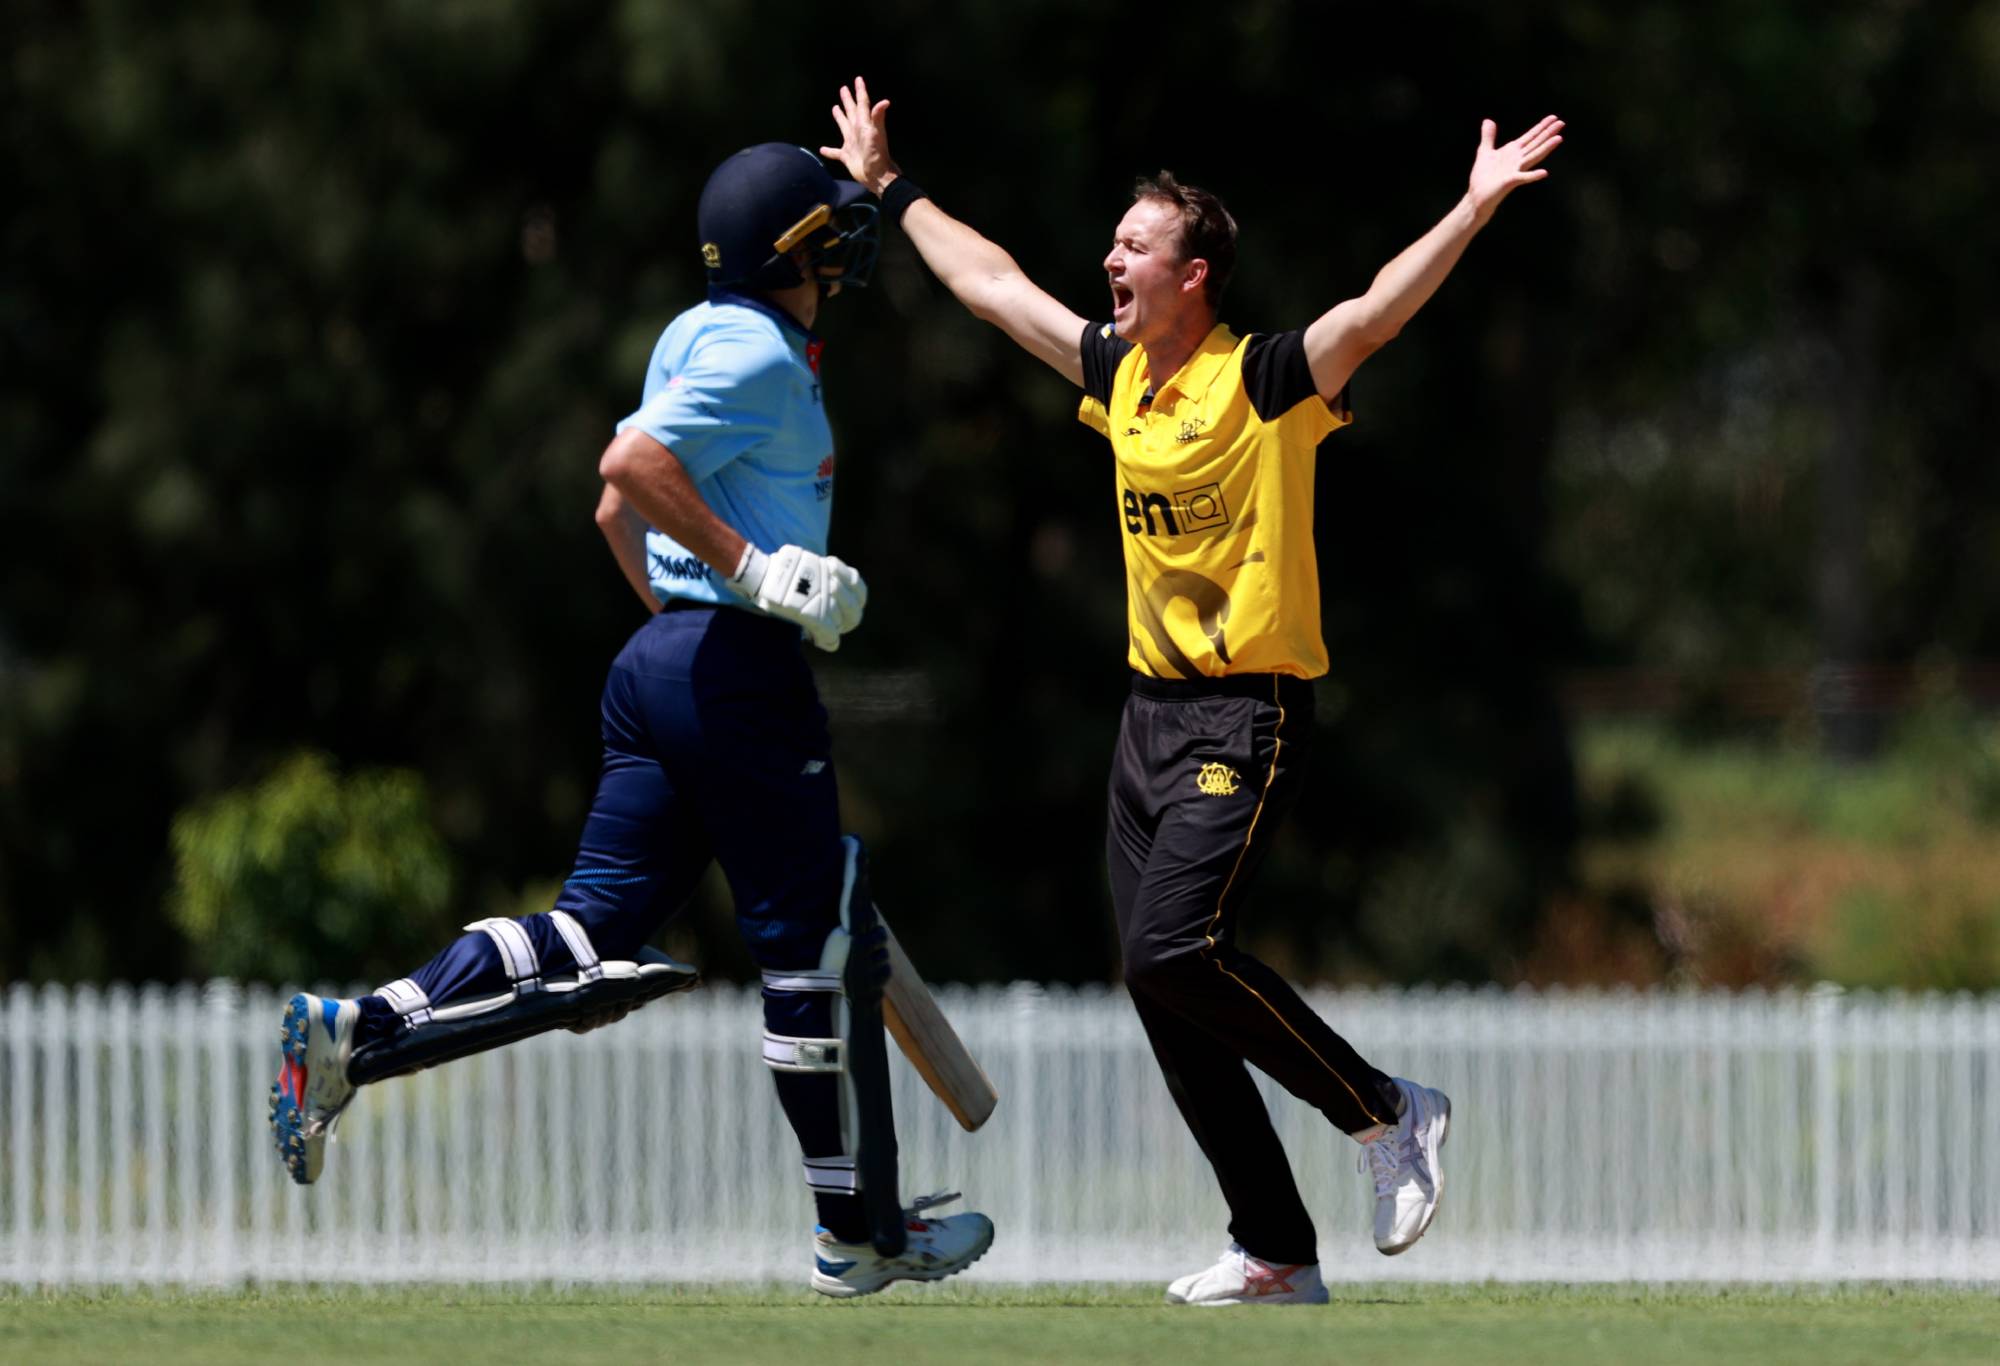 SYDNEY, AUSTRALIA - FEBRUARY 25: Joel Paris of Western Australia celebrates after taking the wicket of Jackson Bird of the Blues during the March One Day Cup Final match between New South Wales Blues and Western Australia at Cricket Central on February 25, 2024 in Sydney, Australia. (Photo by Jason McCawley/Getty Images)